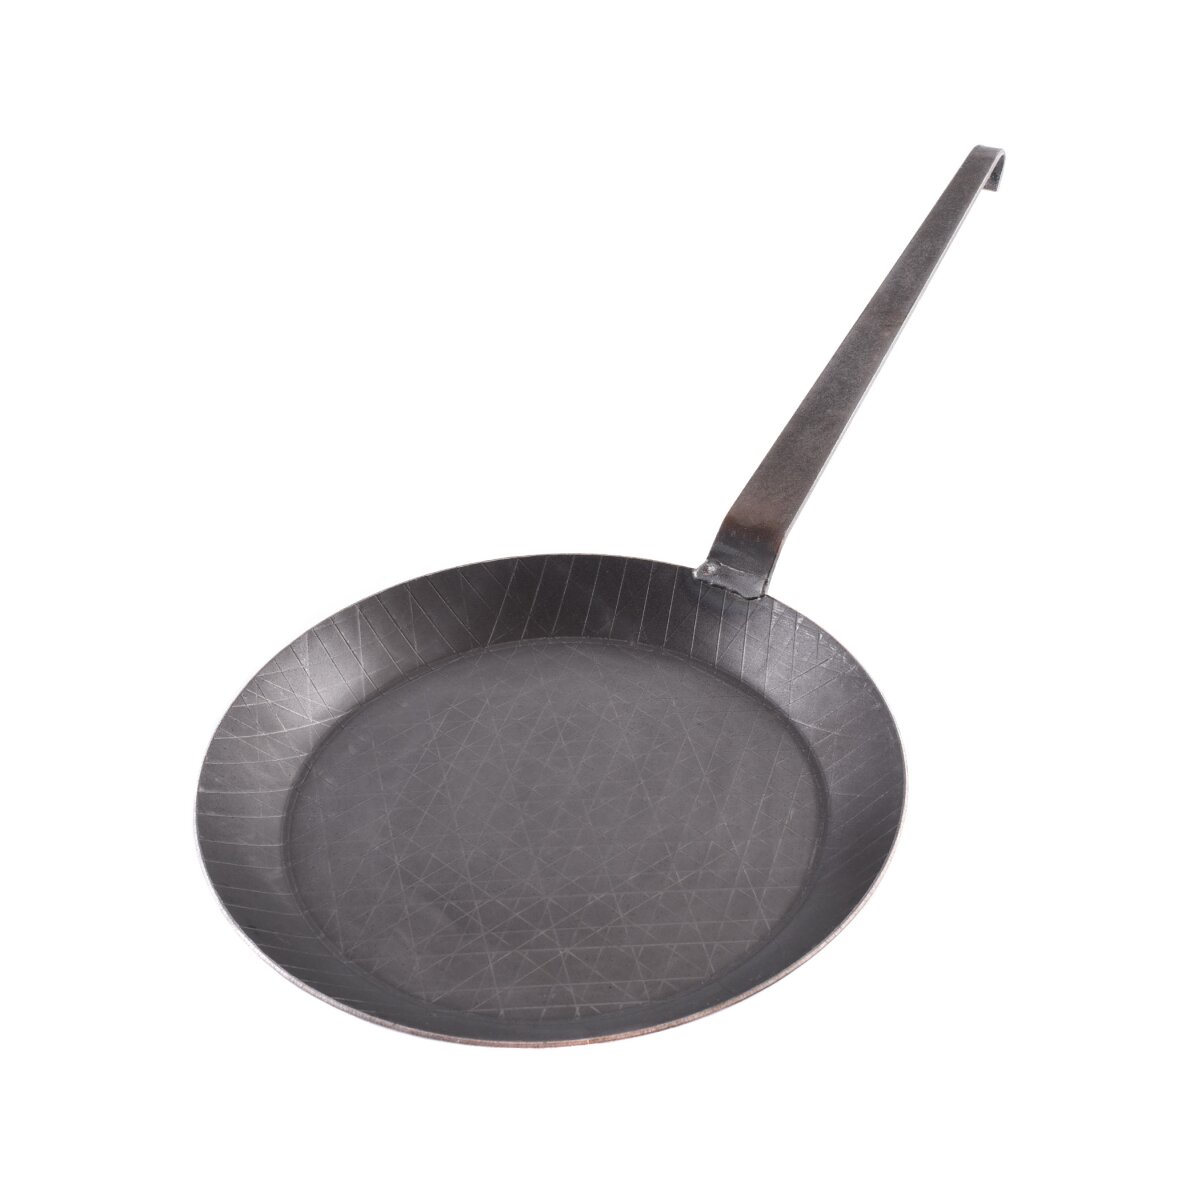 Frying pan with forged hook handle, approx. 32cm